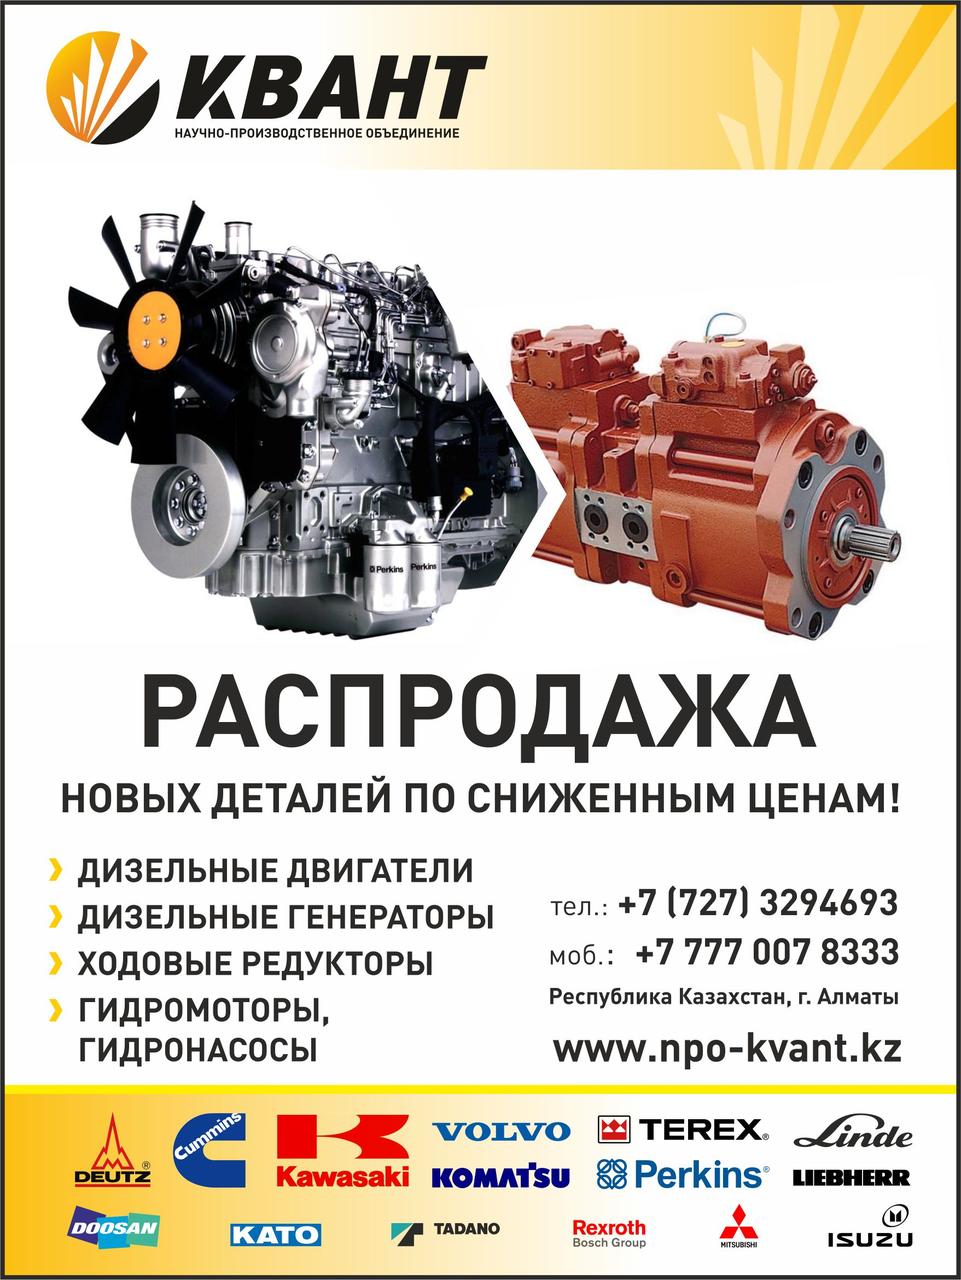 Двигатель Iveco F2BE0642A*A002, Iveco F2BE0642A*A003, Iveco F2BE0642B*A001, Iveco F2CE, Iveco F2CE9687A - фото 2 - id-p47715727